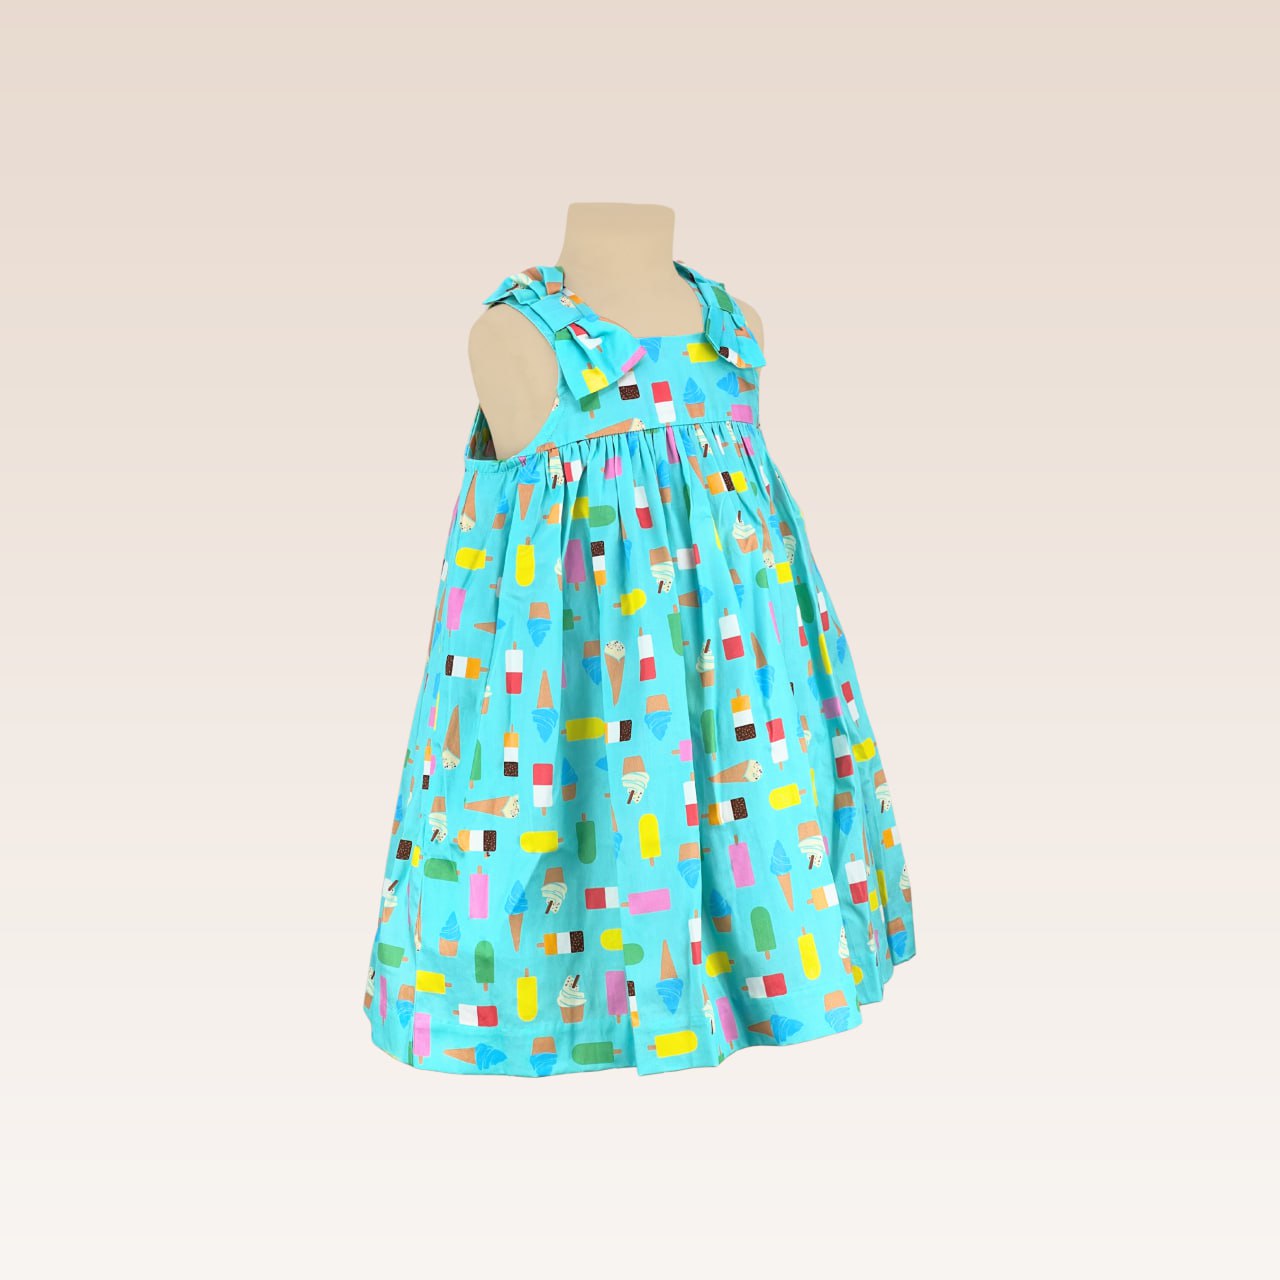 Hailey Baby Girls Blue Green Allover Ice cream Print Empire Dress with Diaper Cover